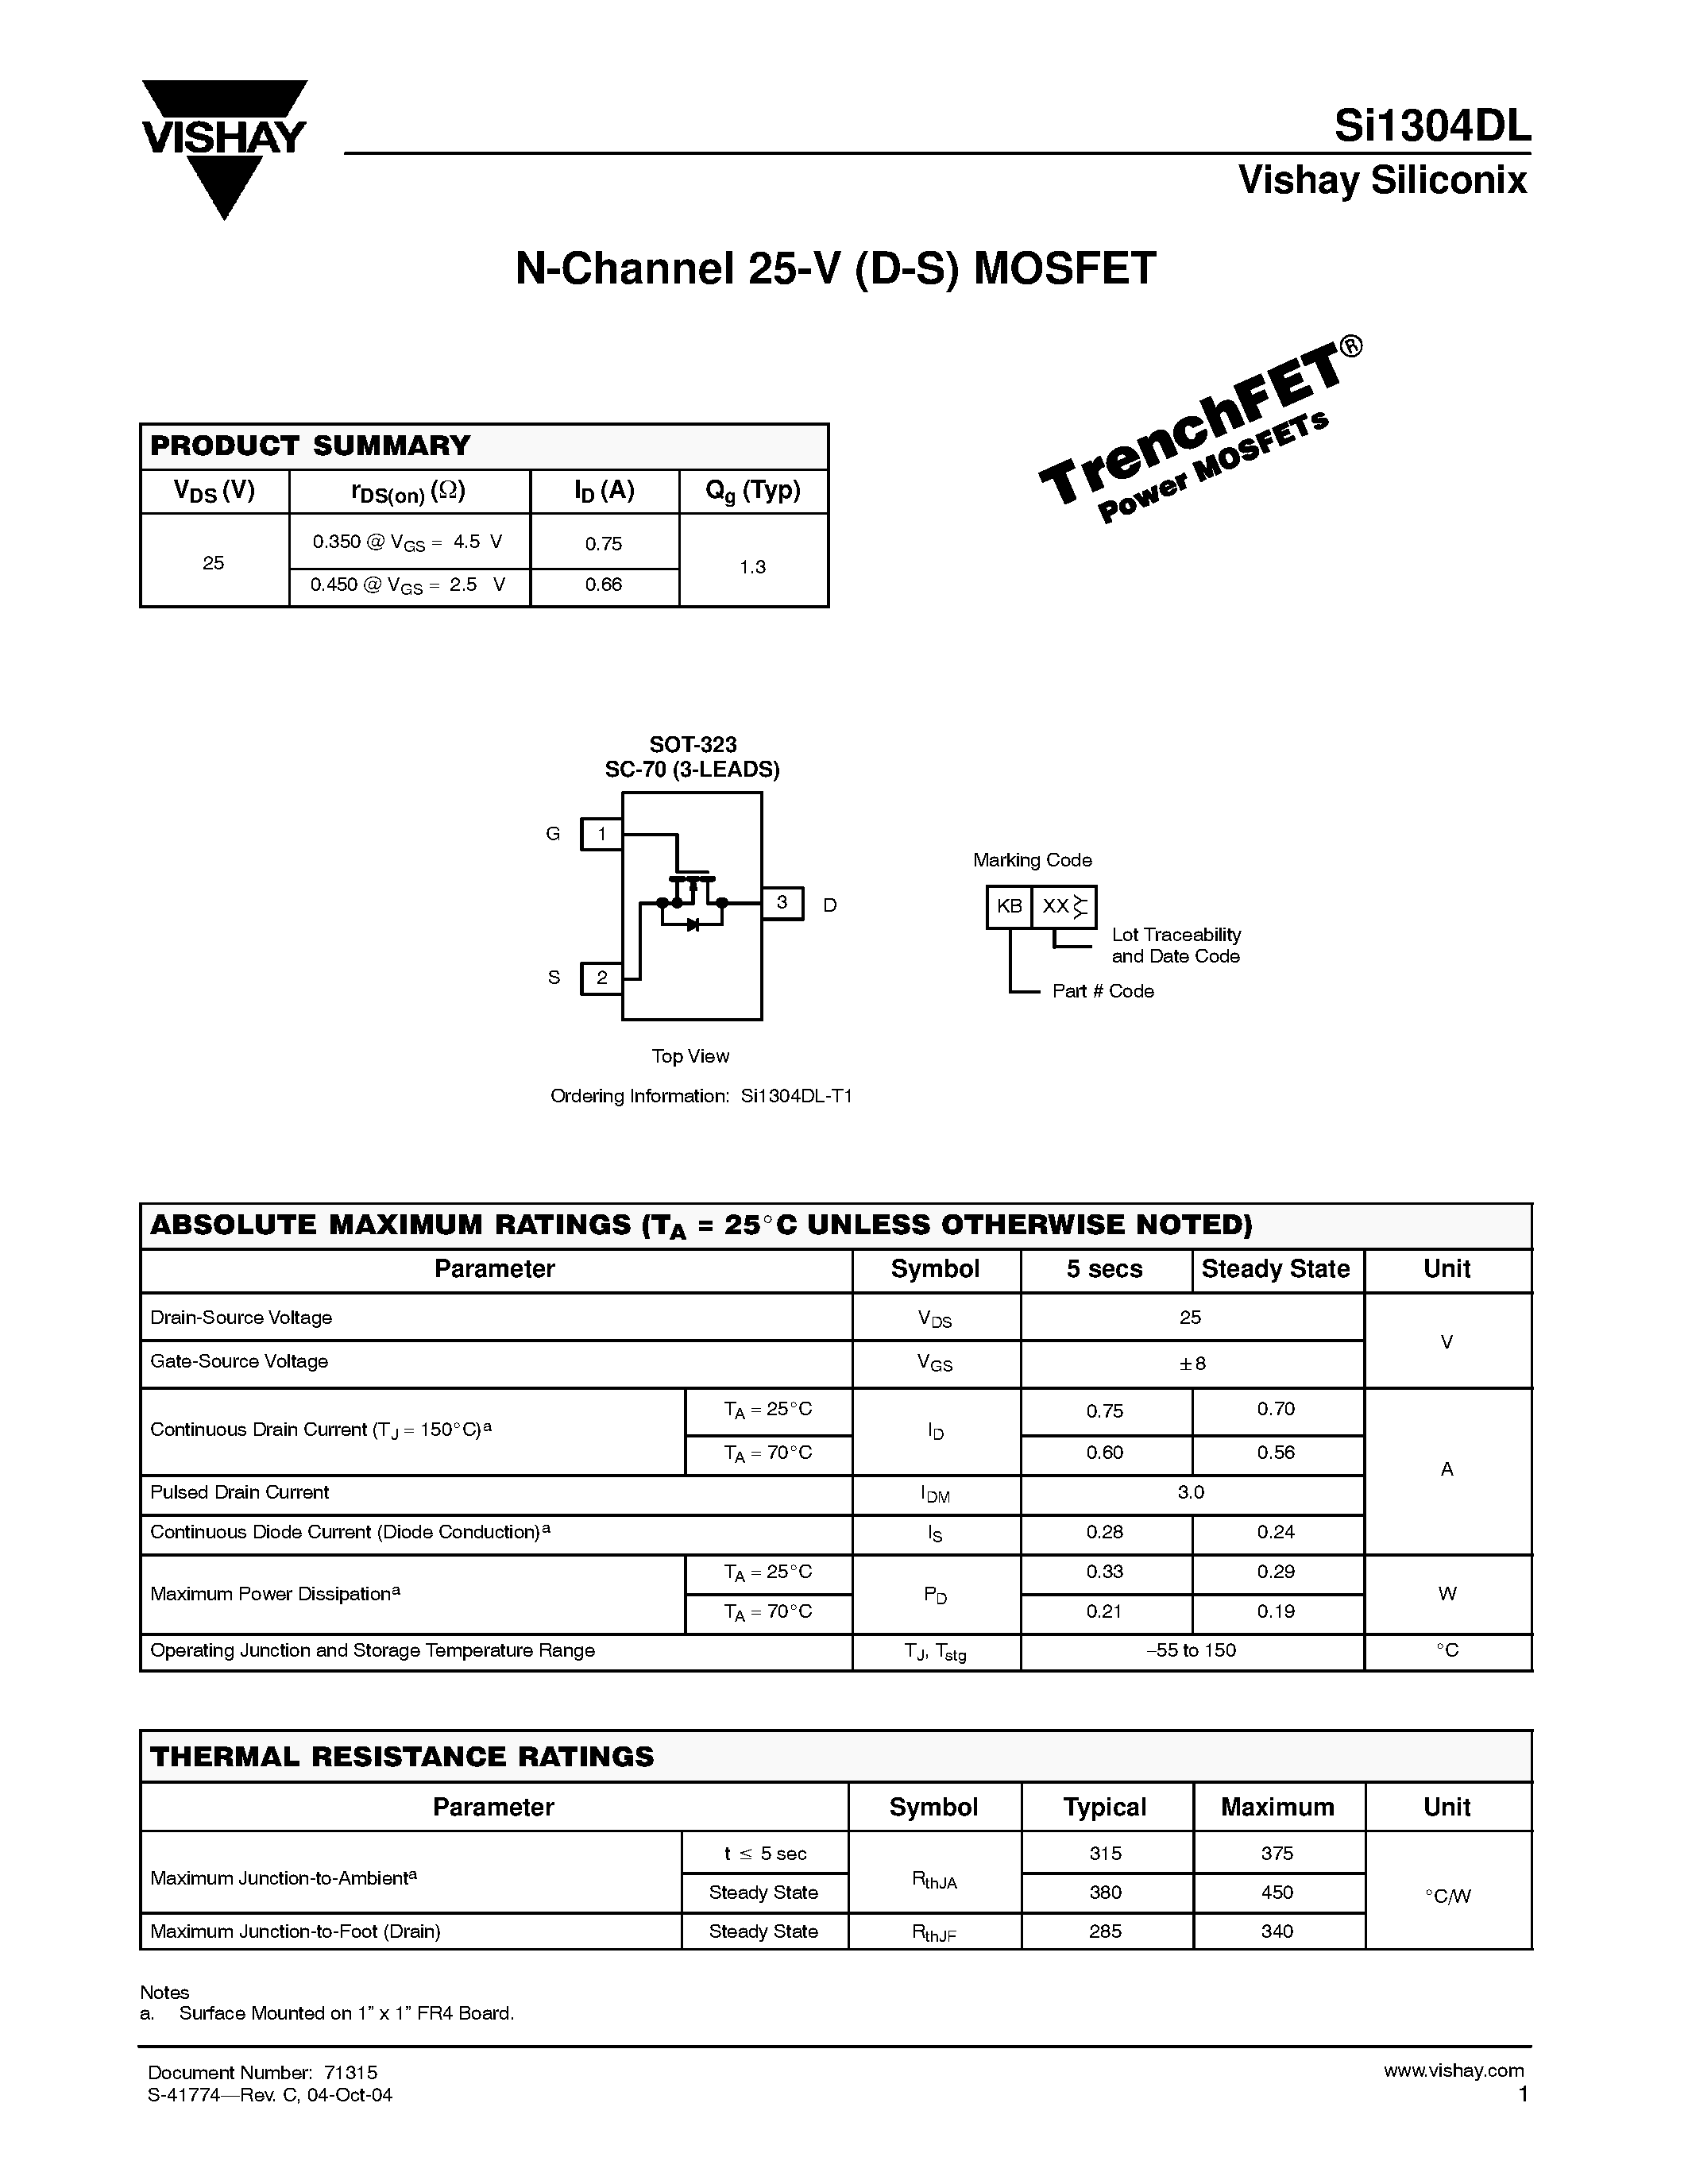 Datasheet Si1304DL-T1 - N-Channel 25-V (D-S) MOSFET page 1